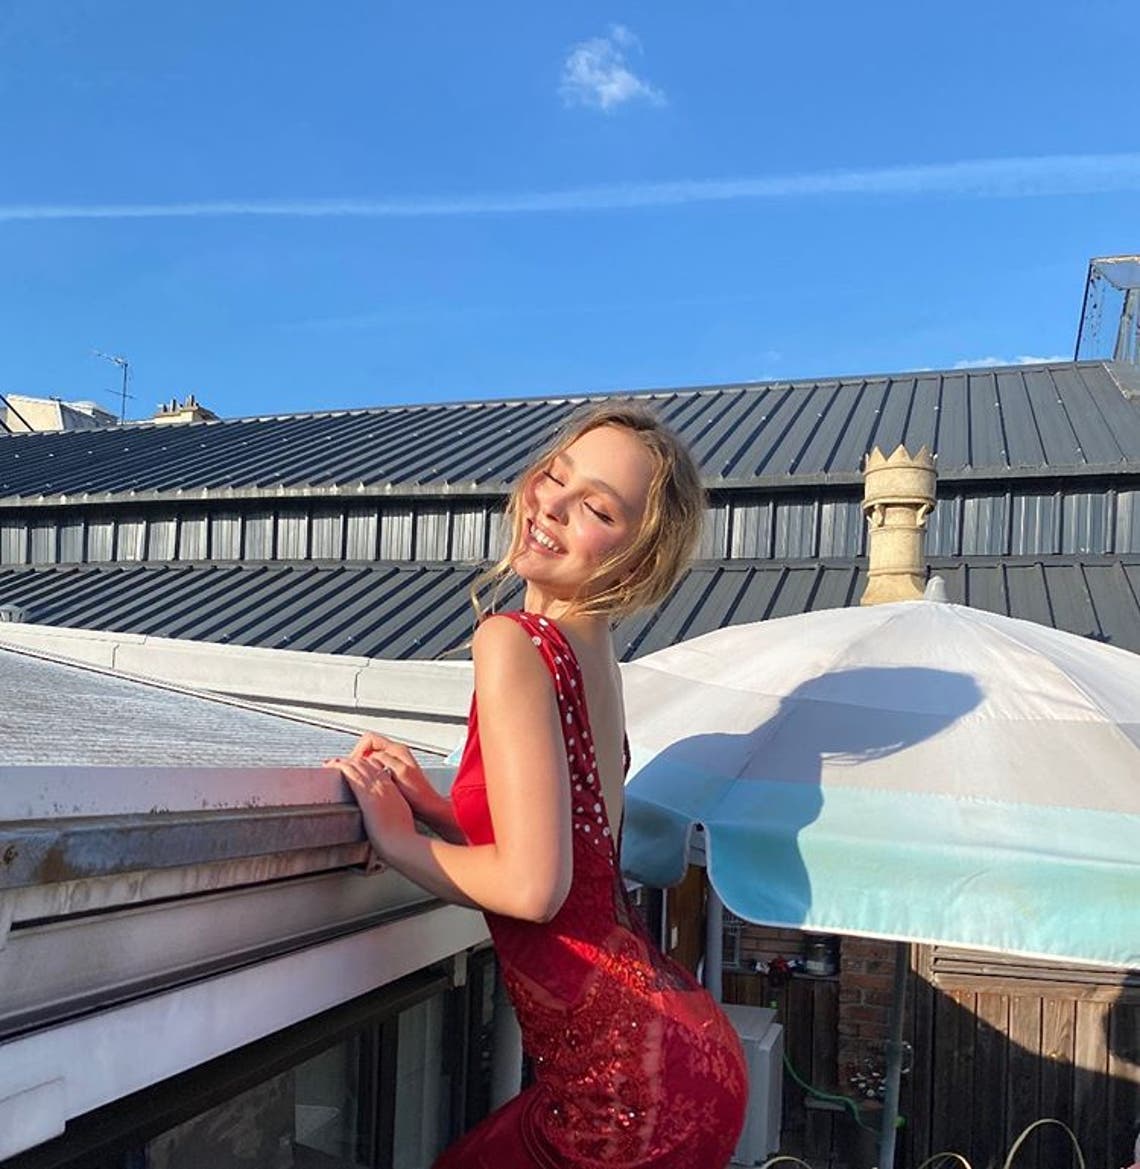 The Stunning Transformation Of Lily-Rose Depp